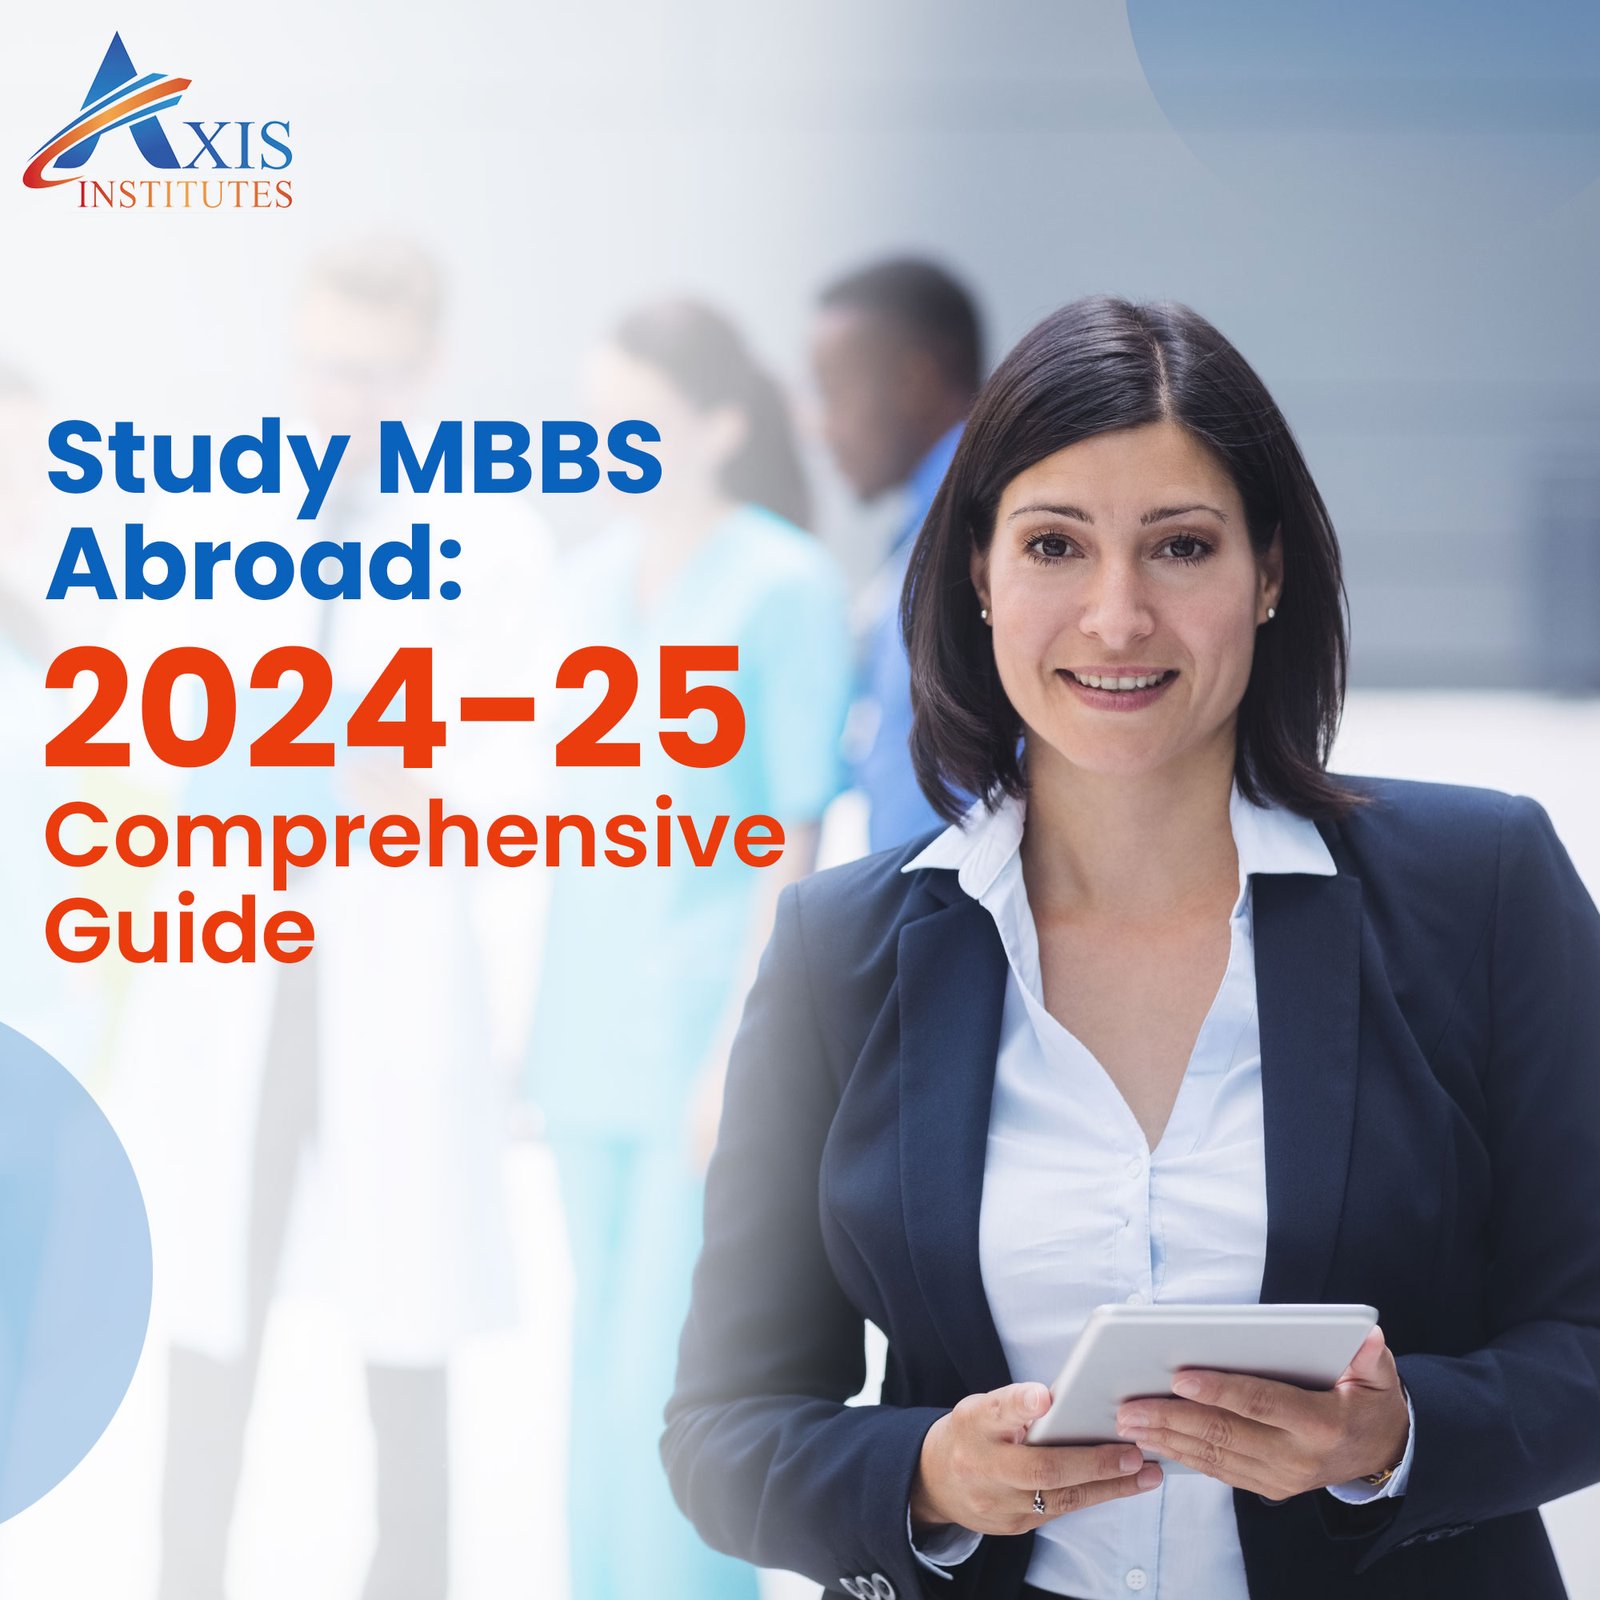 Study MBBS Abroad: 2024-25 Comprehensive Guide